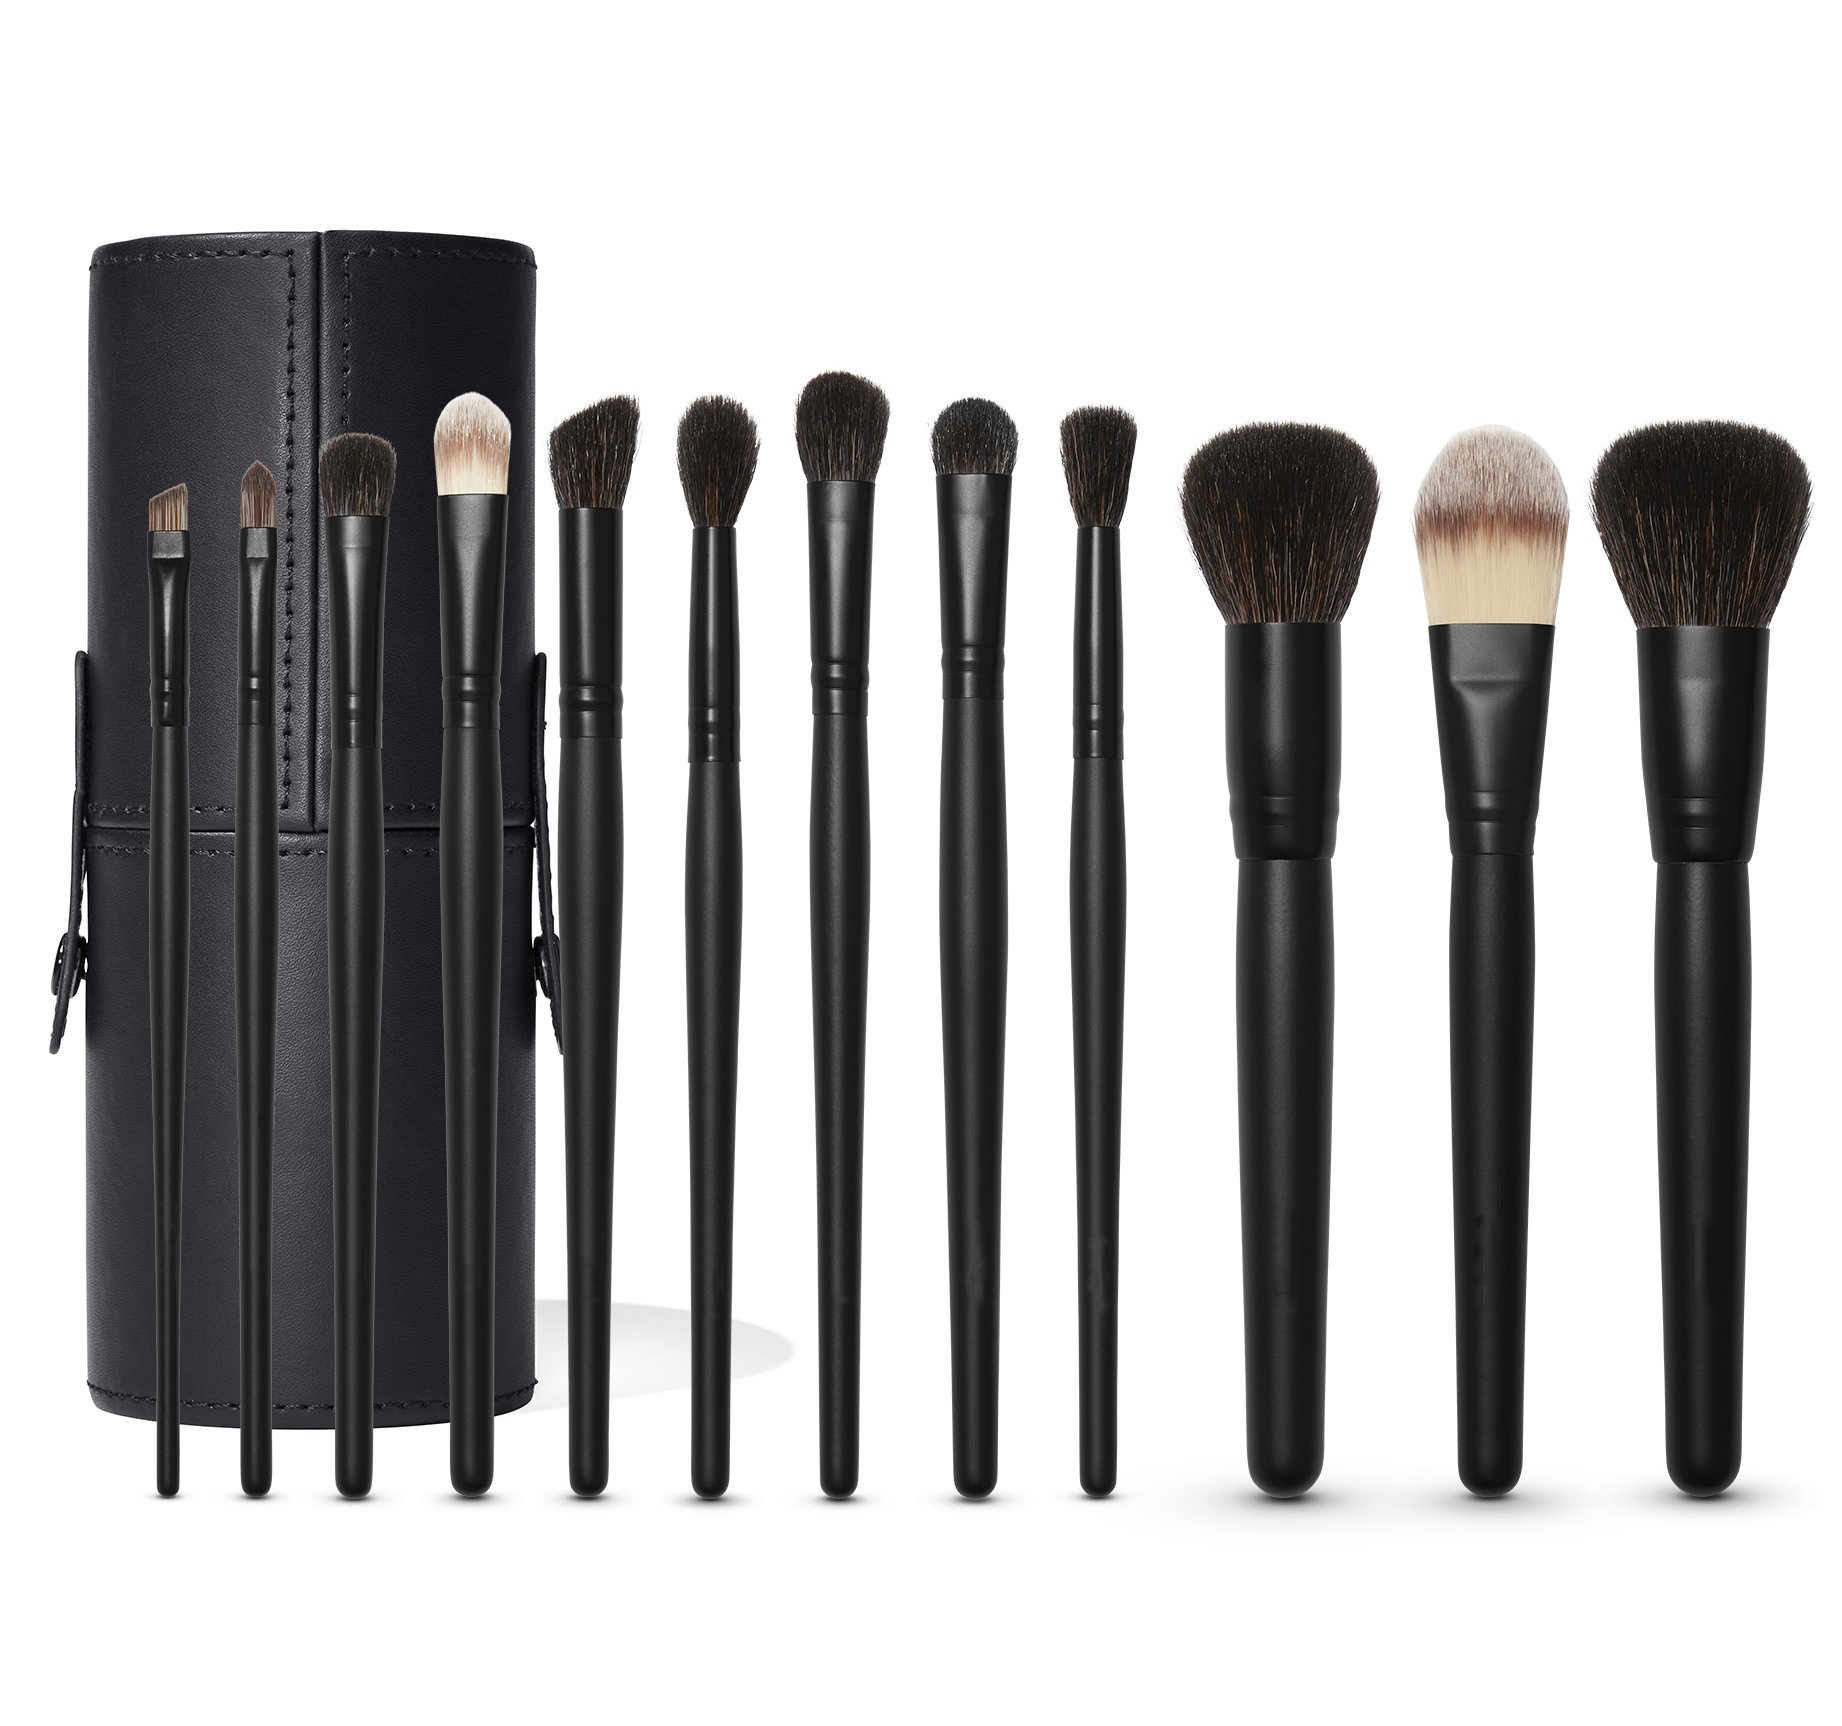 Private label China 12pcs Black makeup brush set with natural hair and synthetic hair